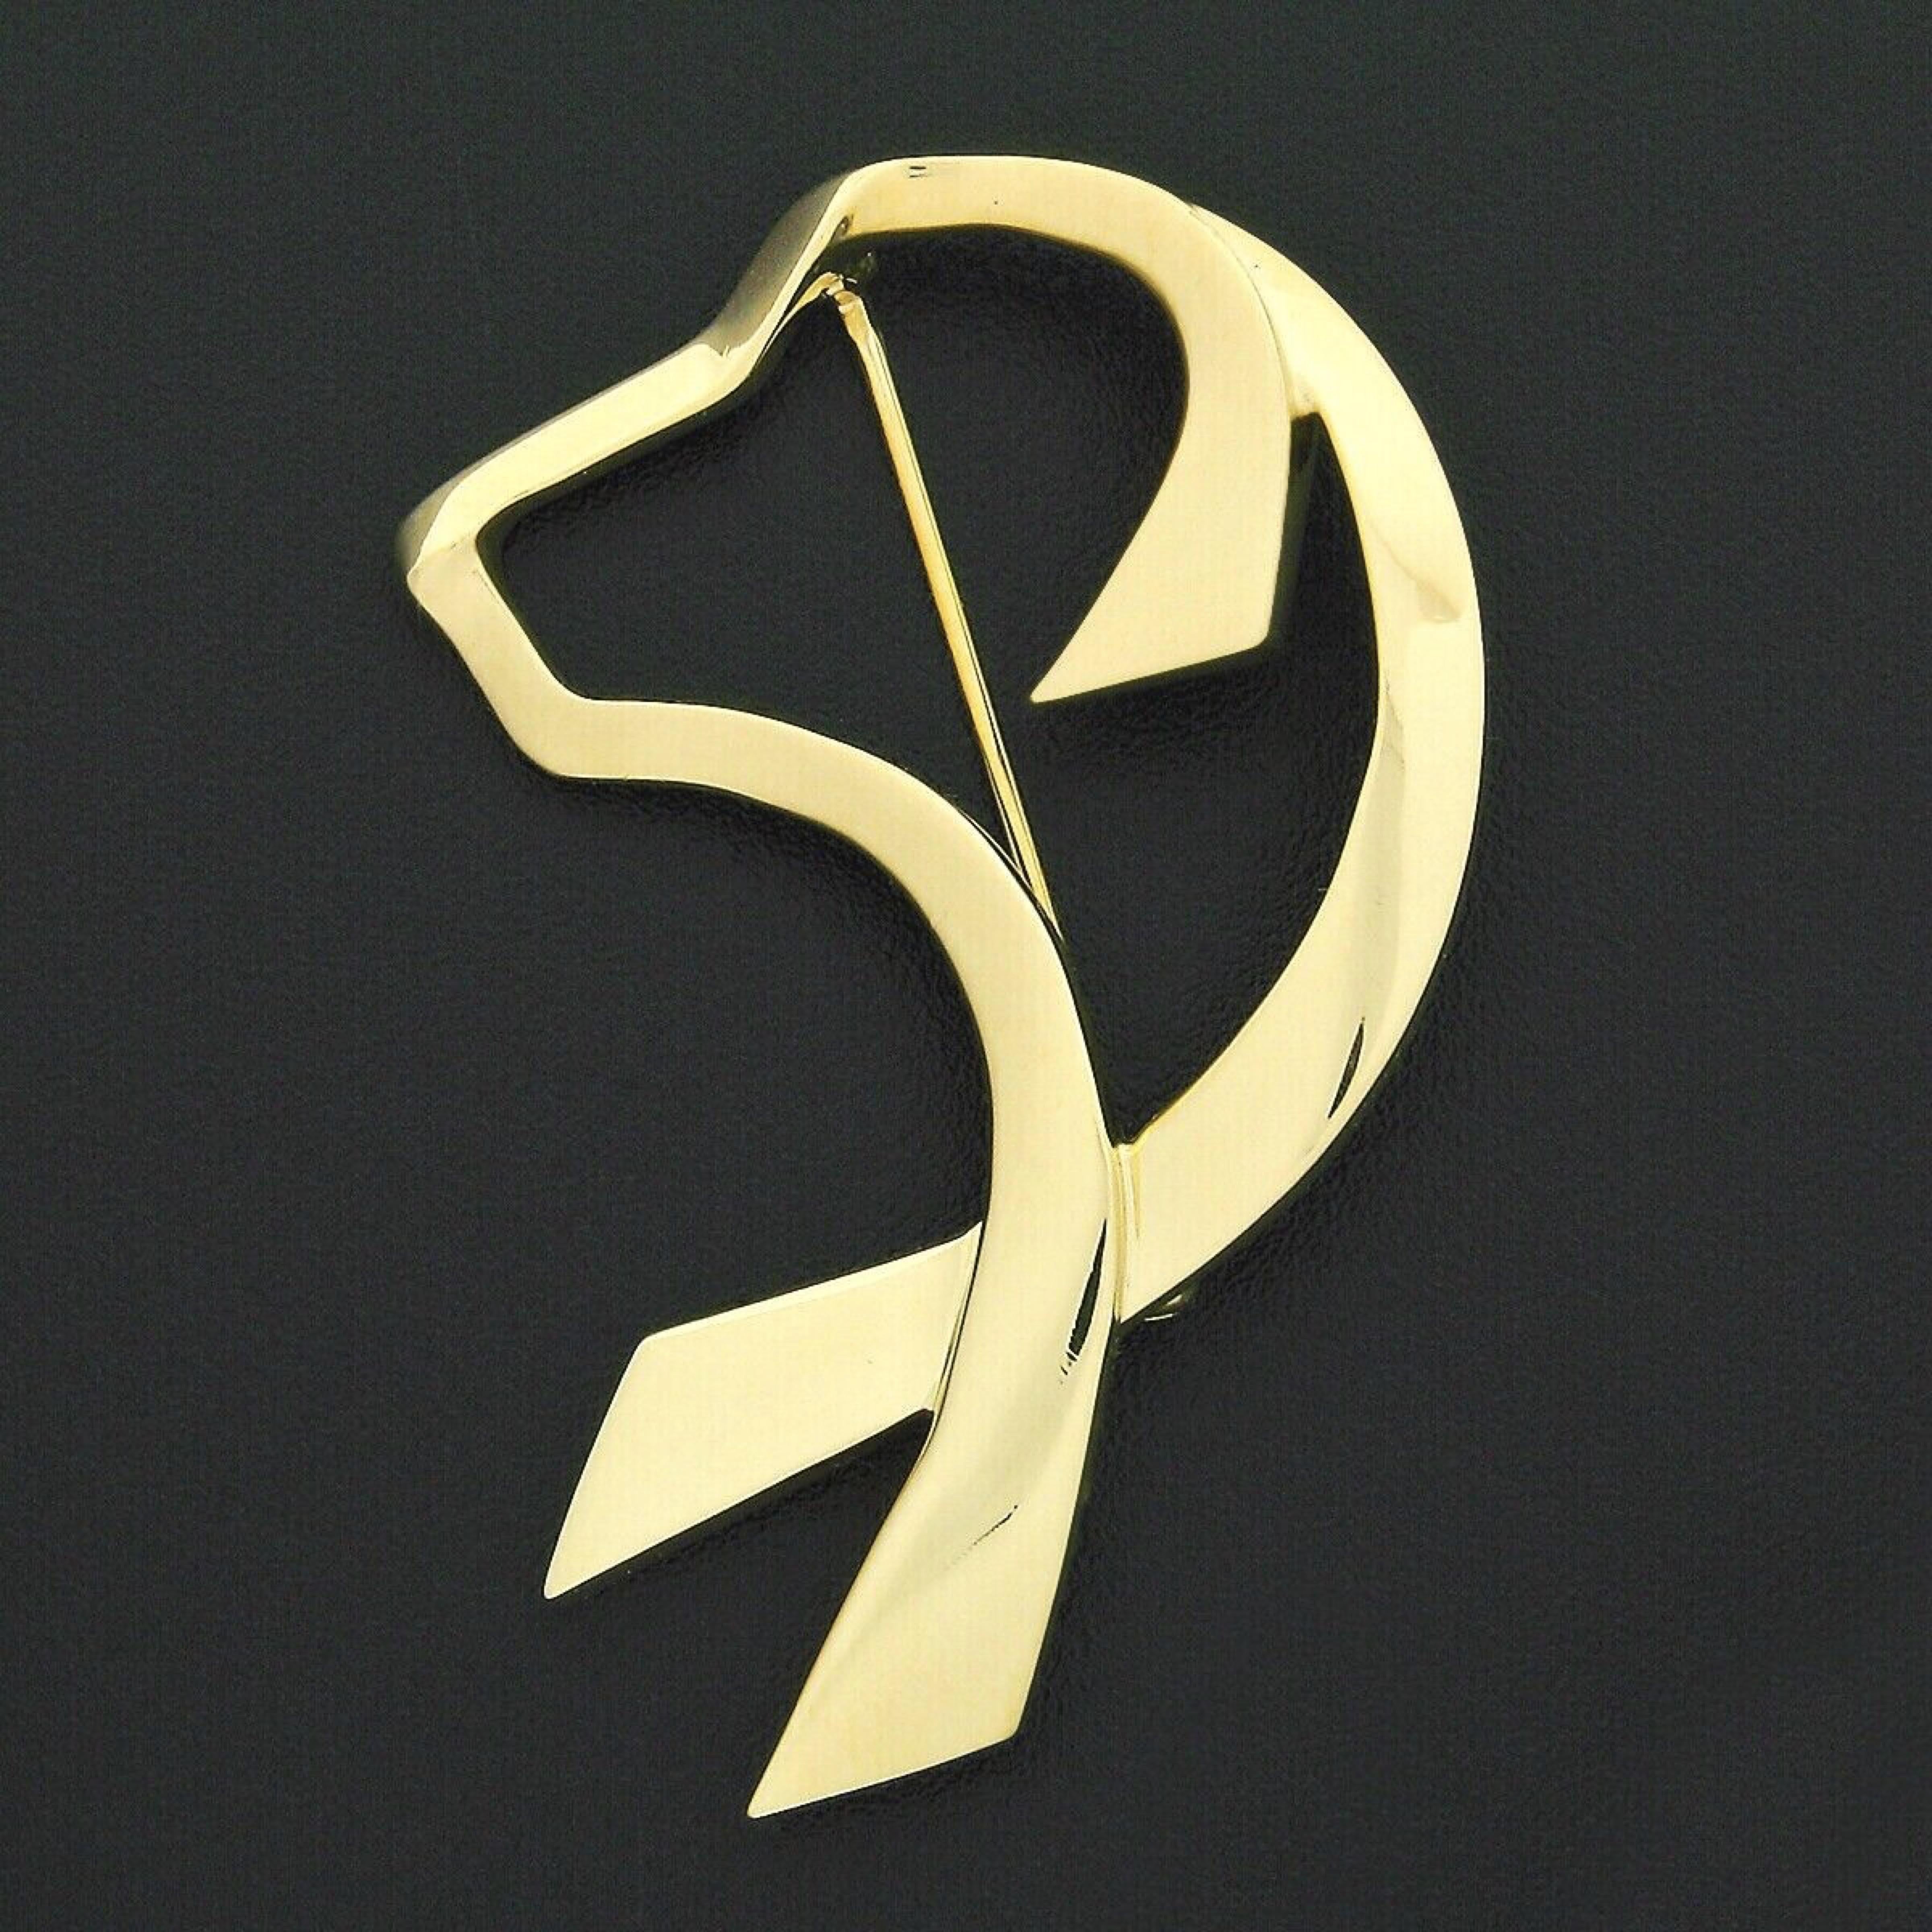 This 100% authentic Tiffany & Co. brooch was designed by Paloma Picasso and was crafted from solid 18k yellow gold. The brooch features a simple and elegant dog's head design crafted from ribbon-like sections of solid 18k yellow gold. The brooch is